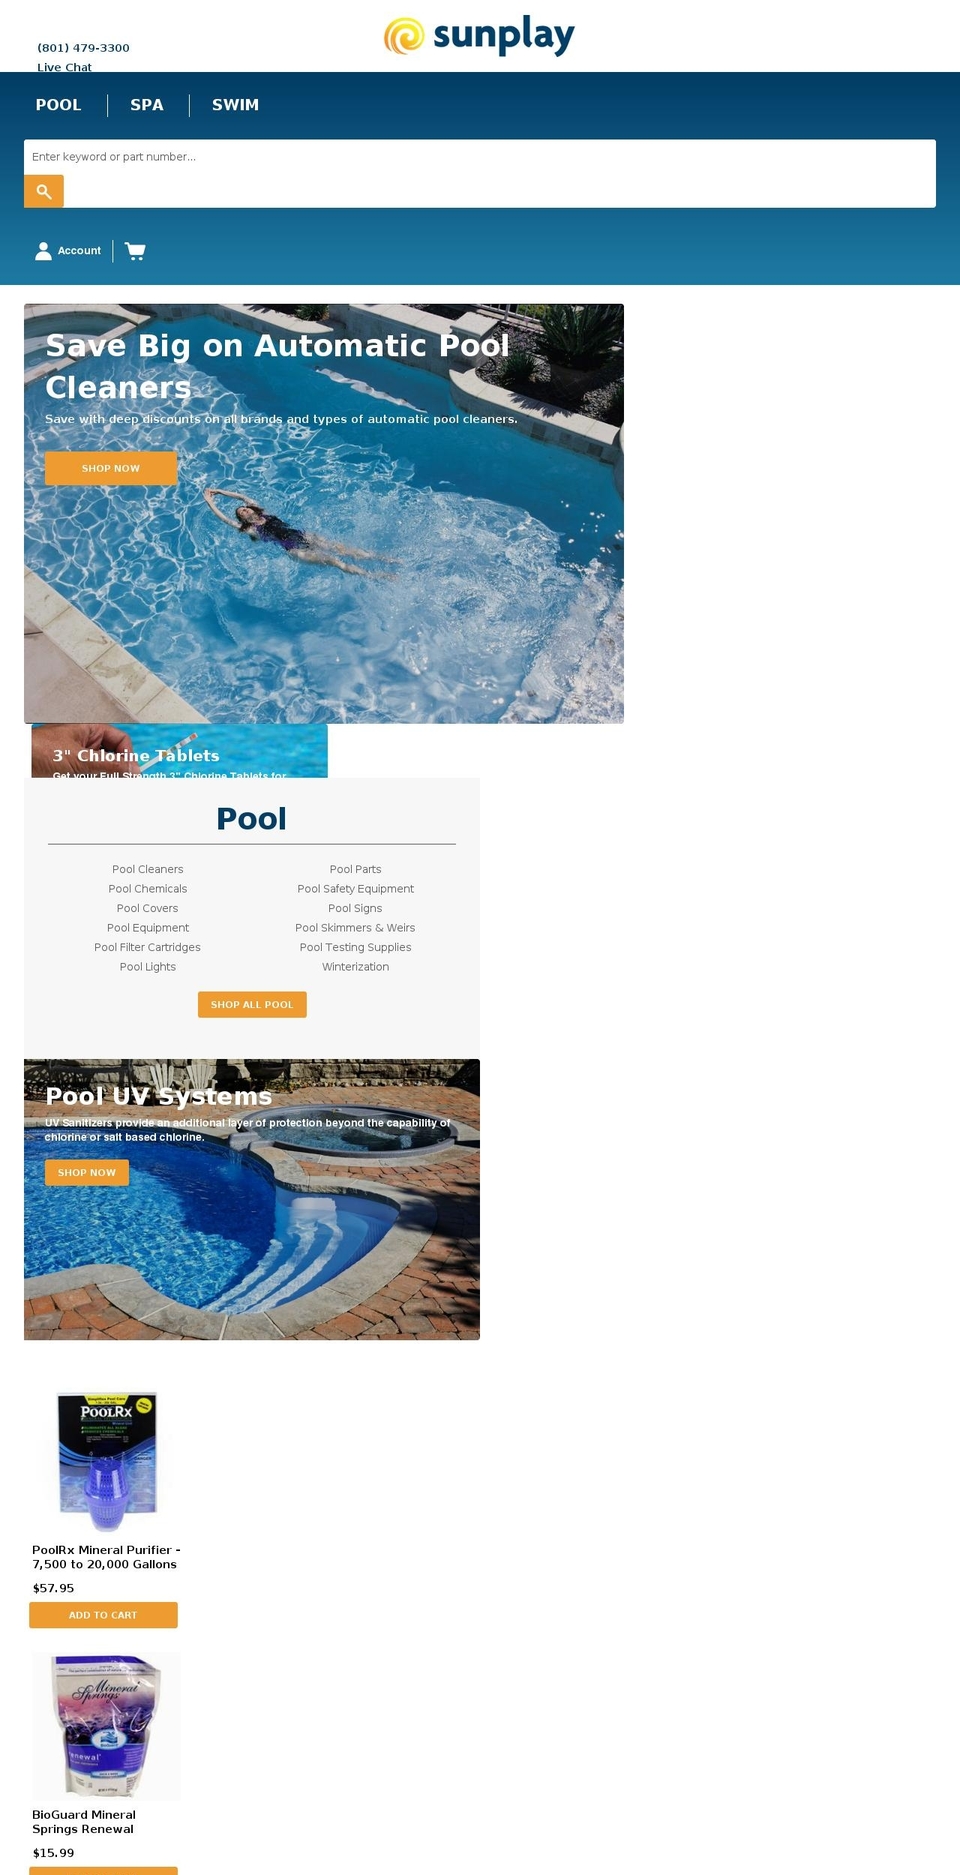 Sunplay v1.0 [Speck - Collection] Shopify theme site example sunnplay.com